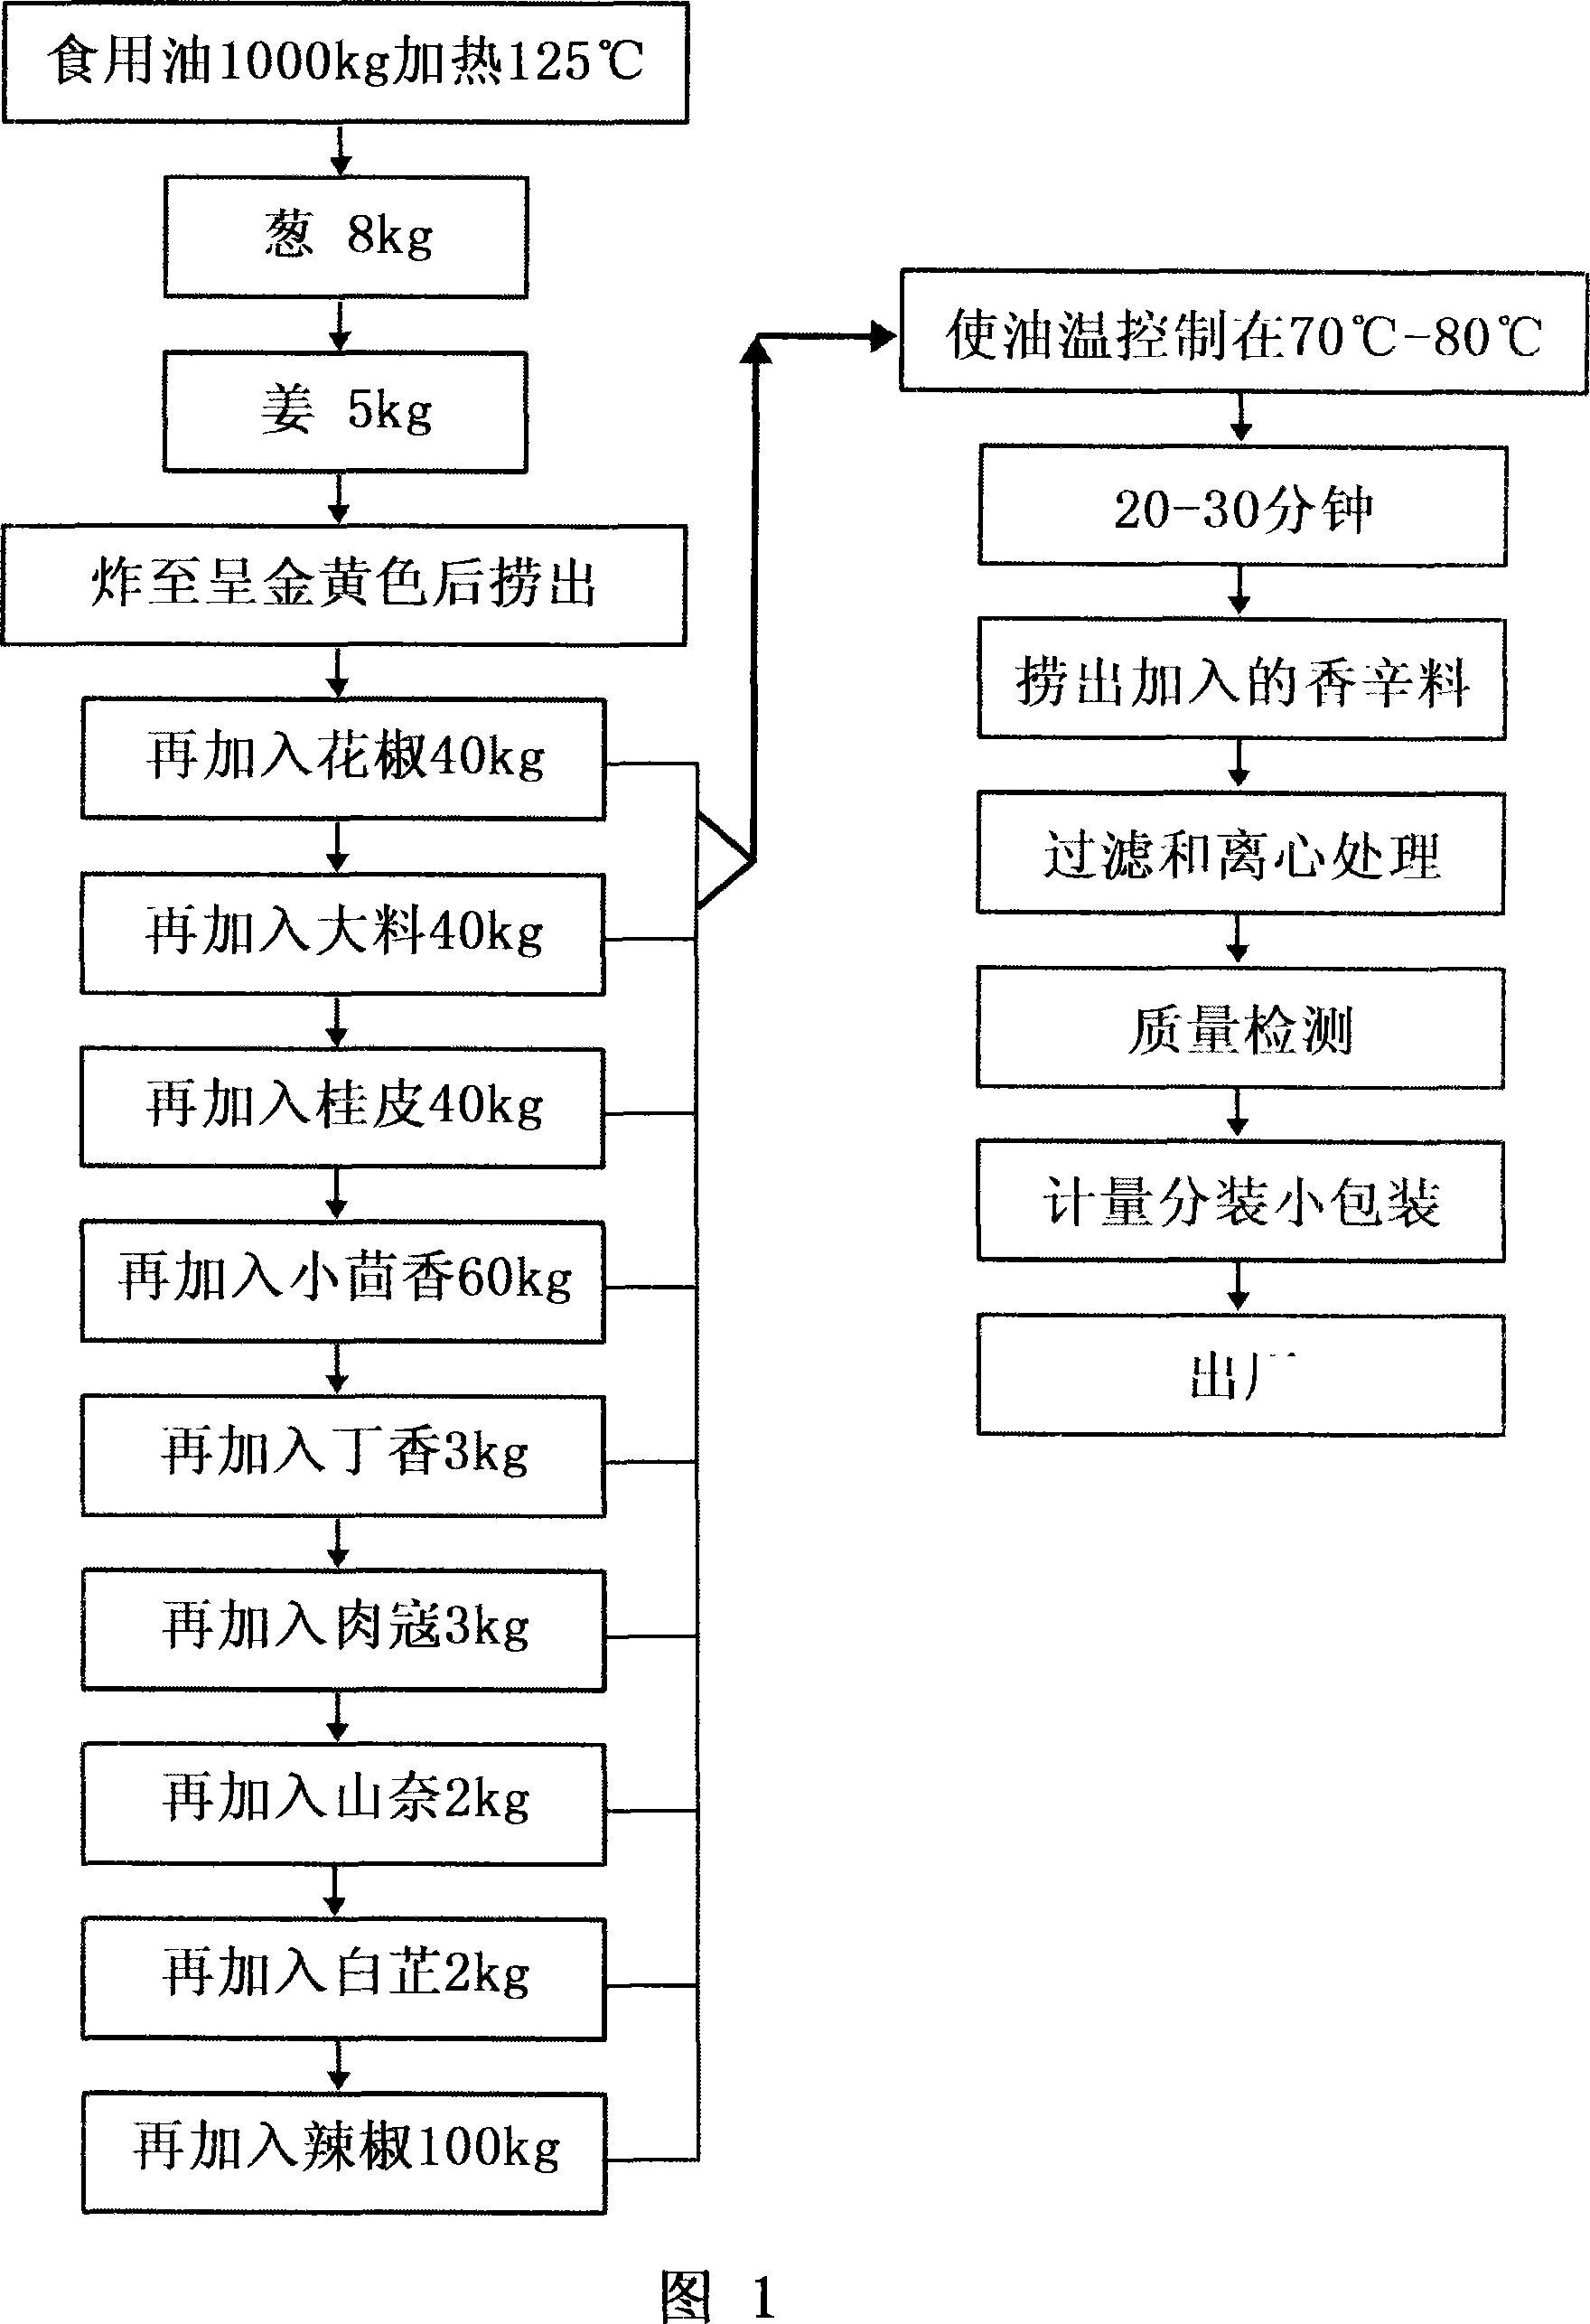 Flavoring edible plant oil and its preparation method